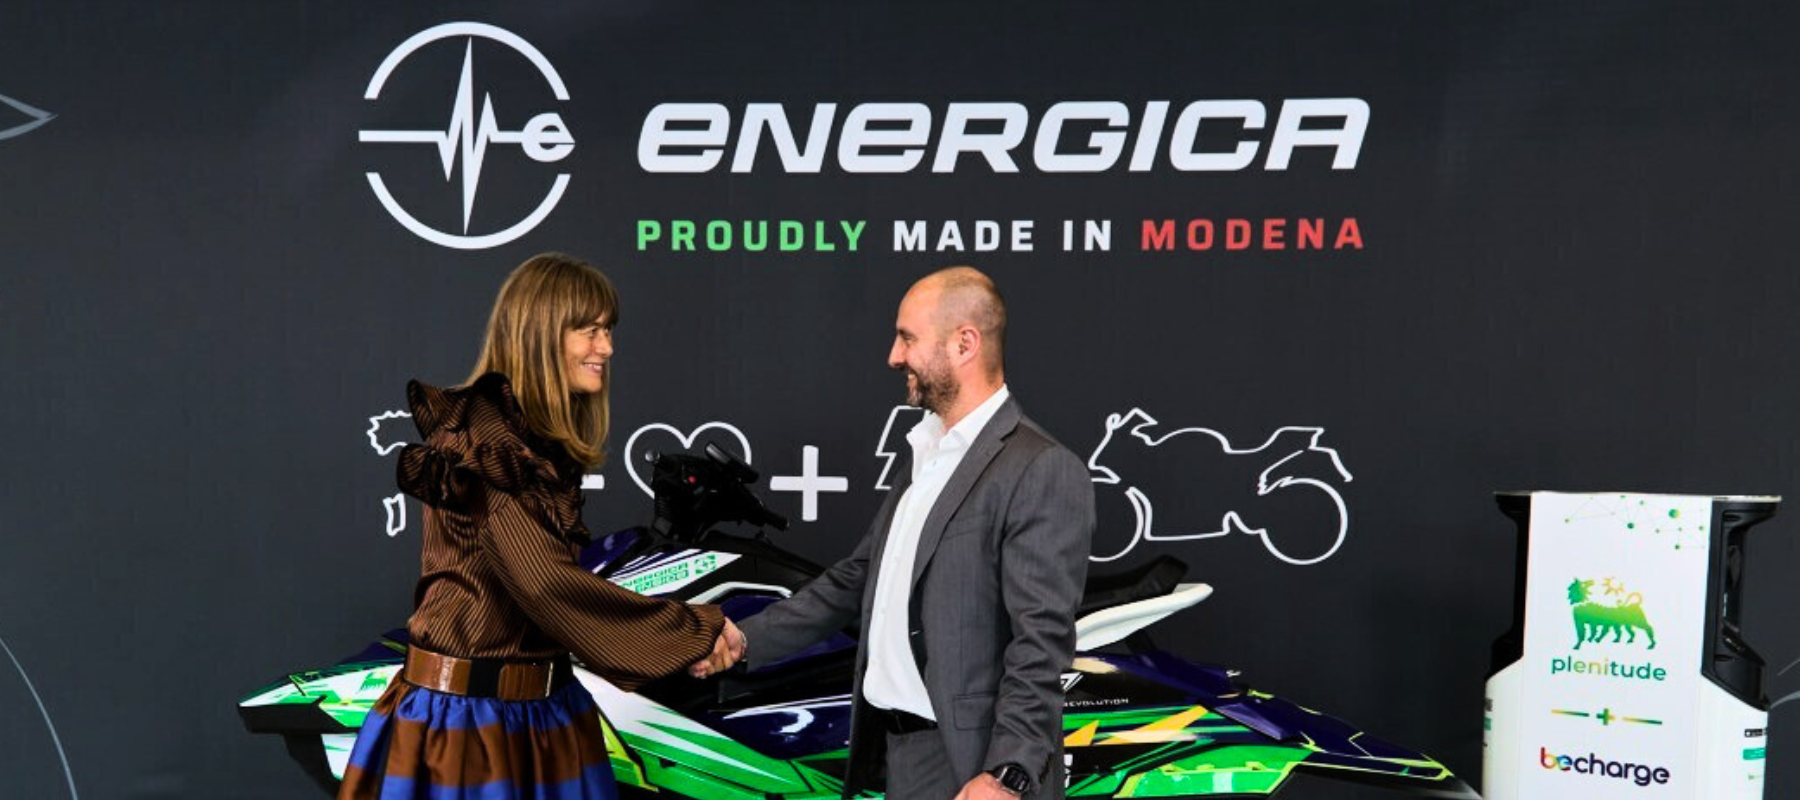 Plenitude, Energica partner to provide innovative solutions for electric mobility